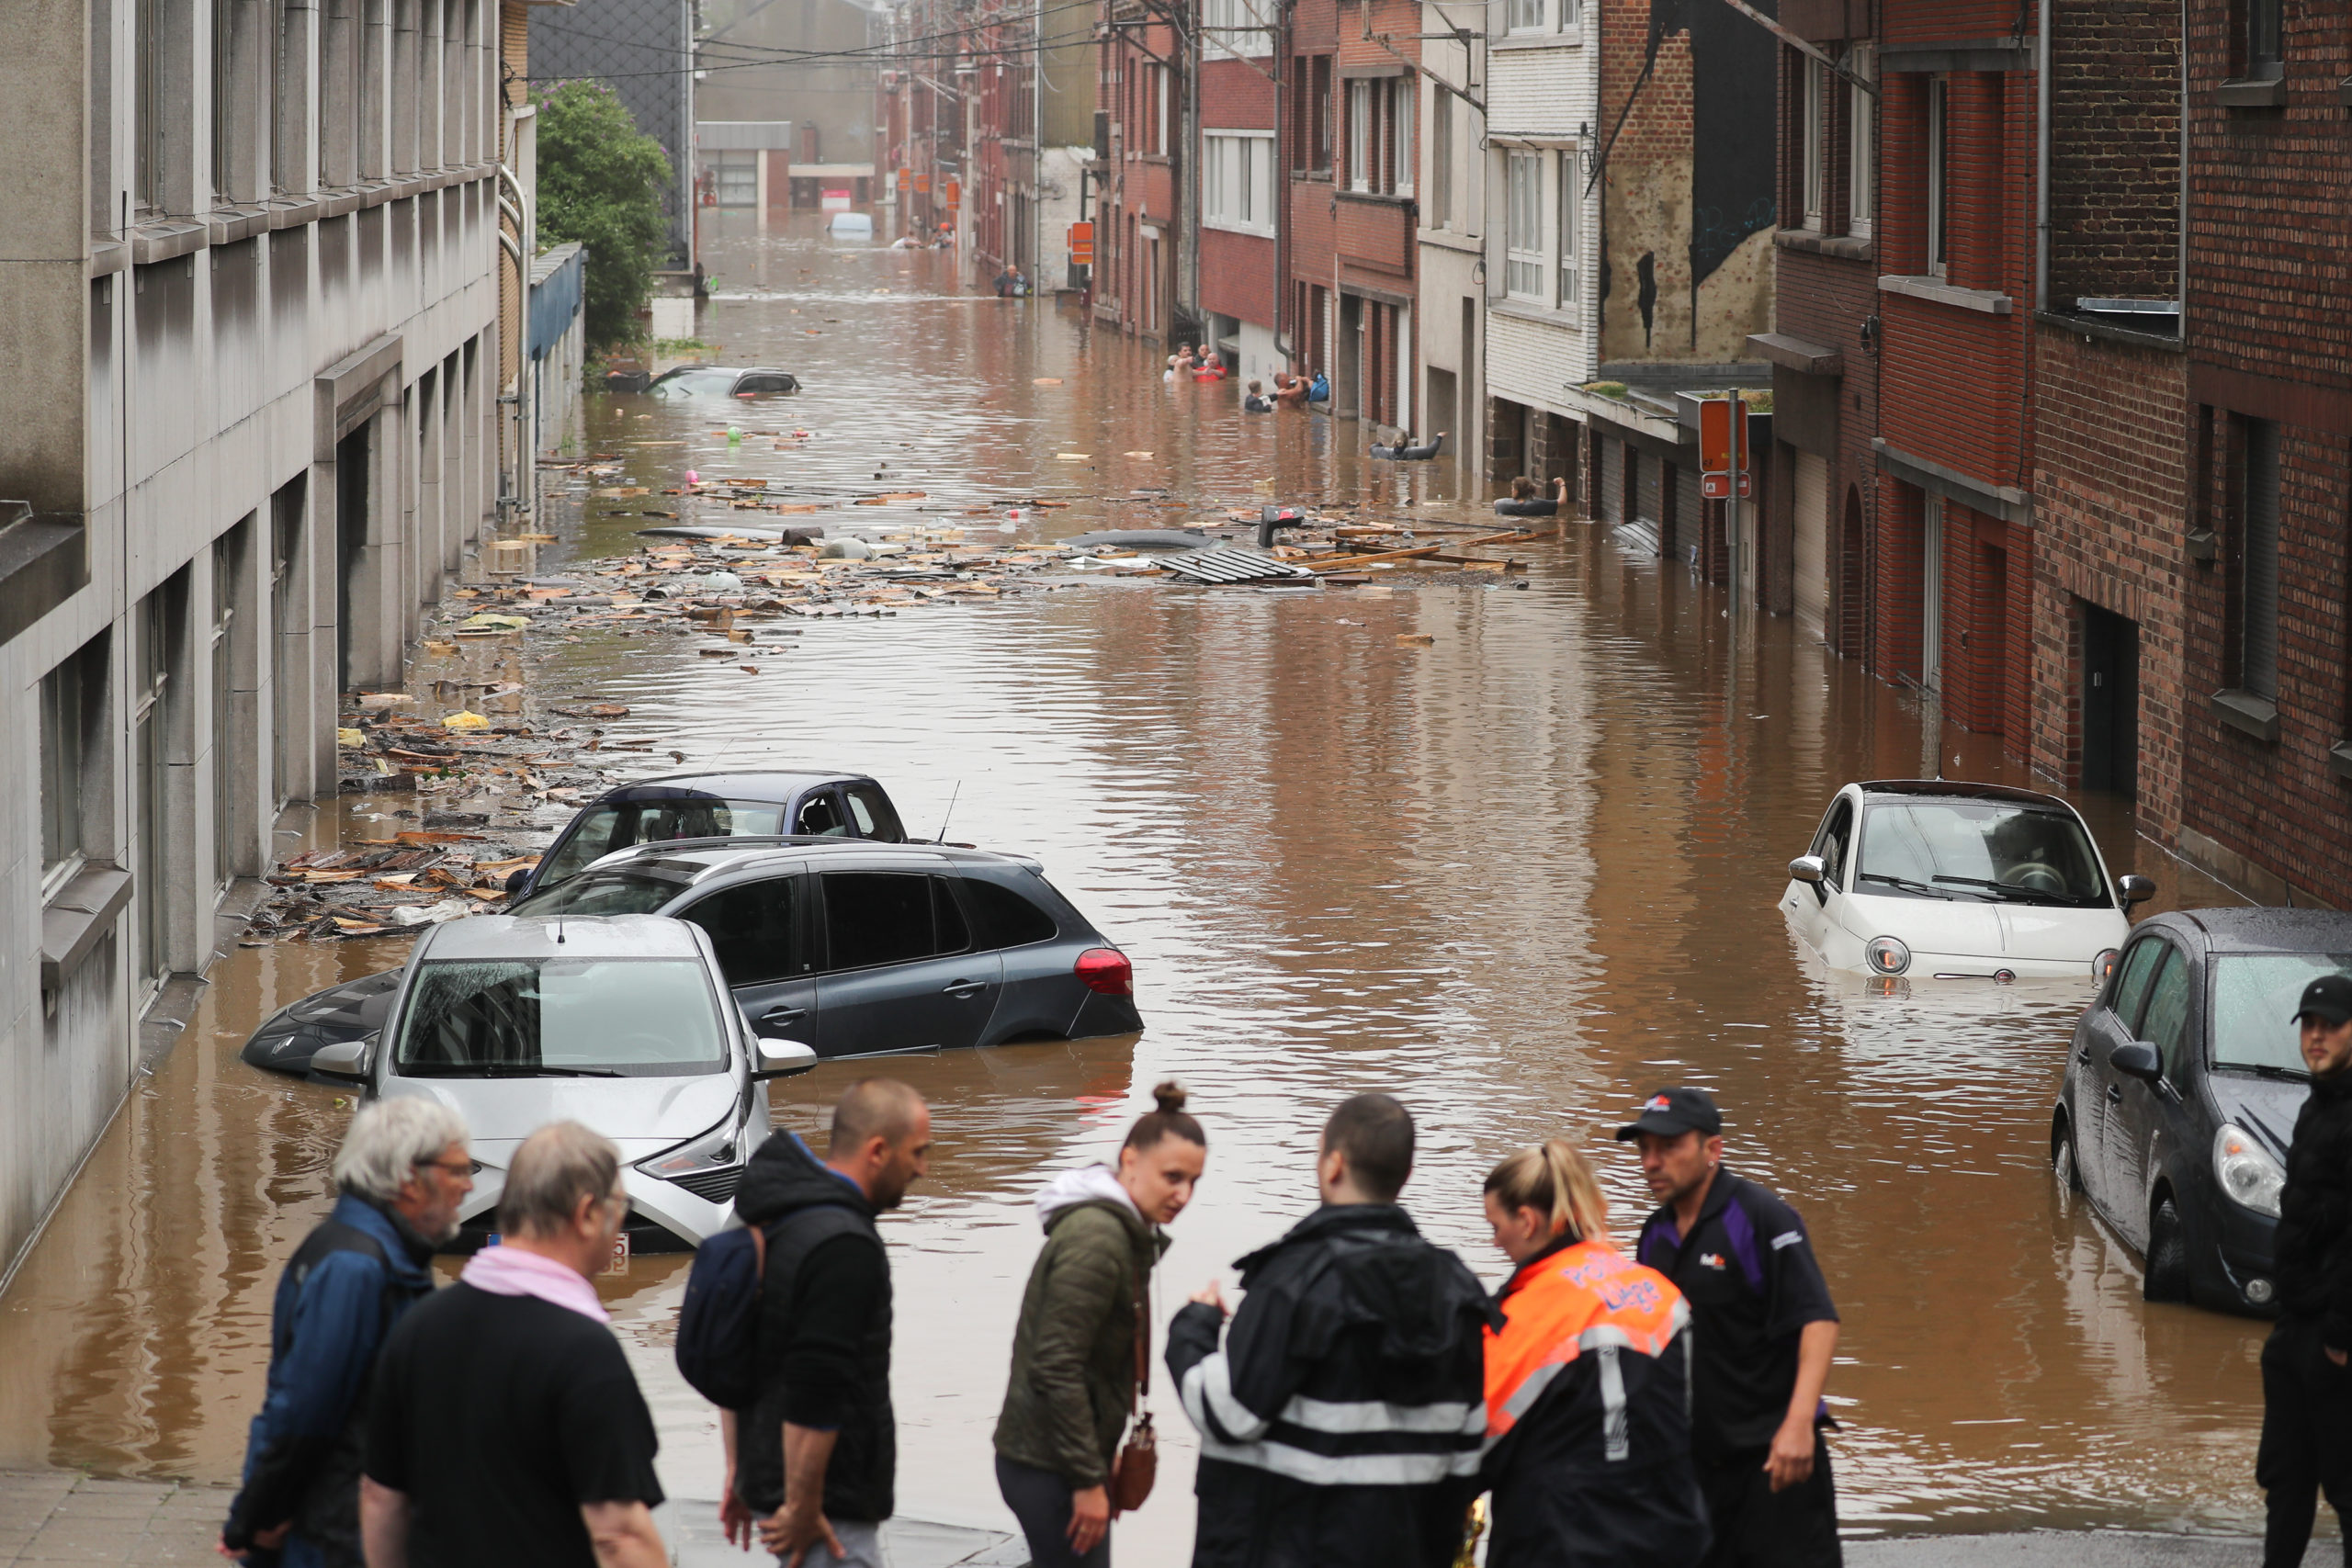 Belgium: used car market boom expected due to July floods